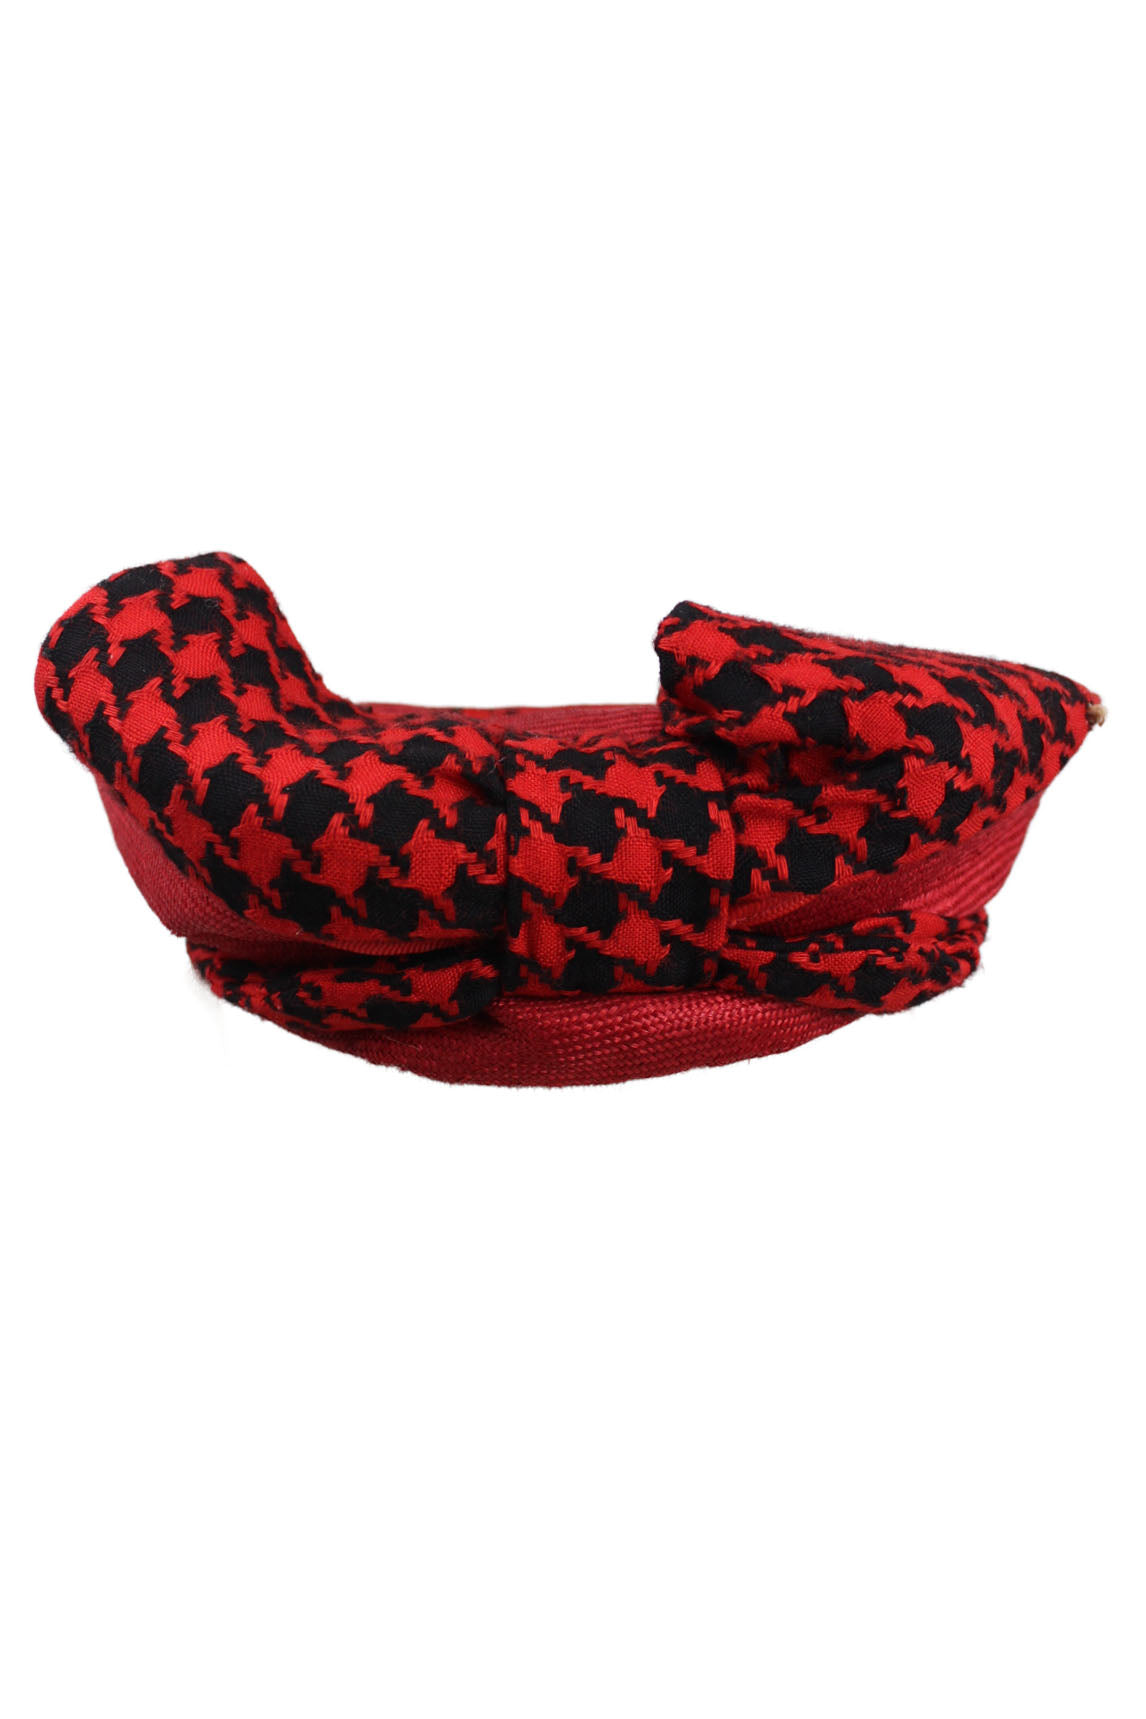 vintage rodney gordon red hat. features theatre piece with curved base and metal lining, 40's inspired design. houndstooth print and red knit. features beige ribbon for neck and plastic comb inside